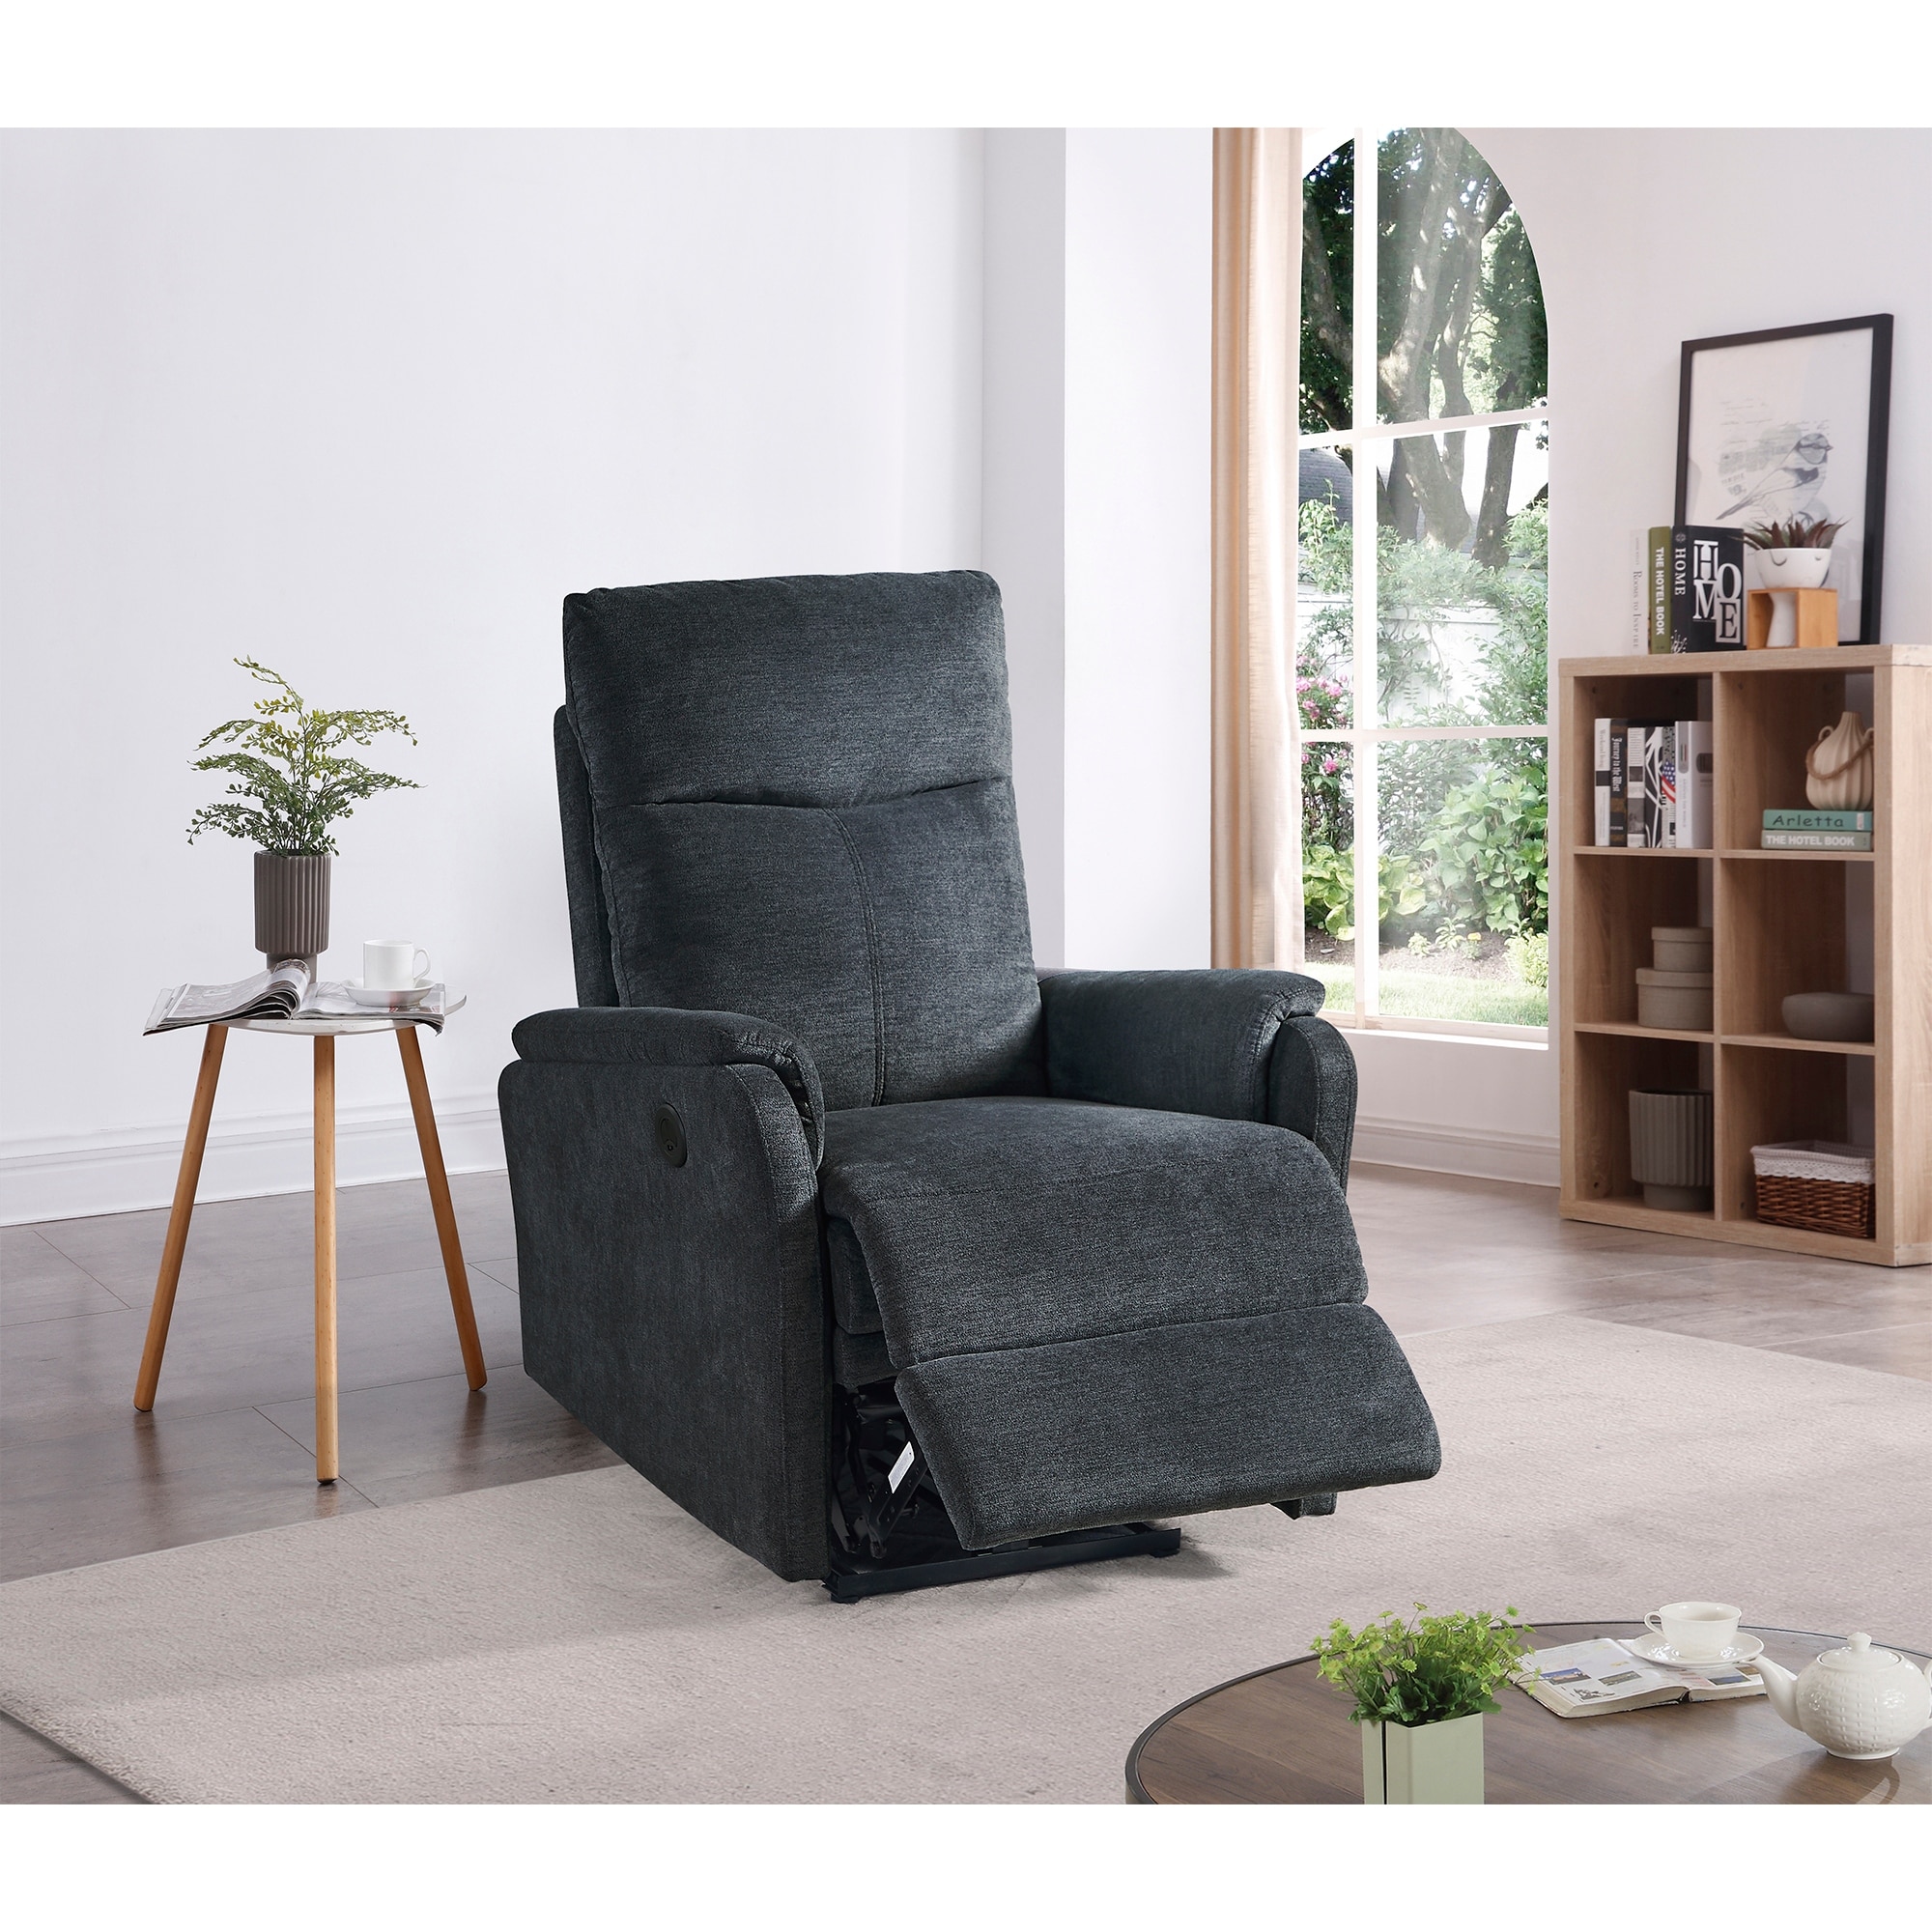 https://ak1.ostkcdn.com/images/products/is/images/direct/4f936a702b14722041f434cea224b8f3bcaabee9/Power-Recliner-Chair-Fabric-Recliner-Sofa-Home-Theater-Seating-with-USB-Port-%26-Lumbar-Support-Single-Sofa-Chair-for-Living-Room.jpg